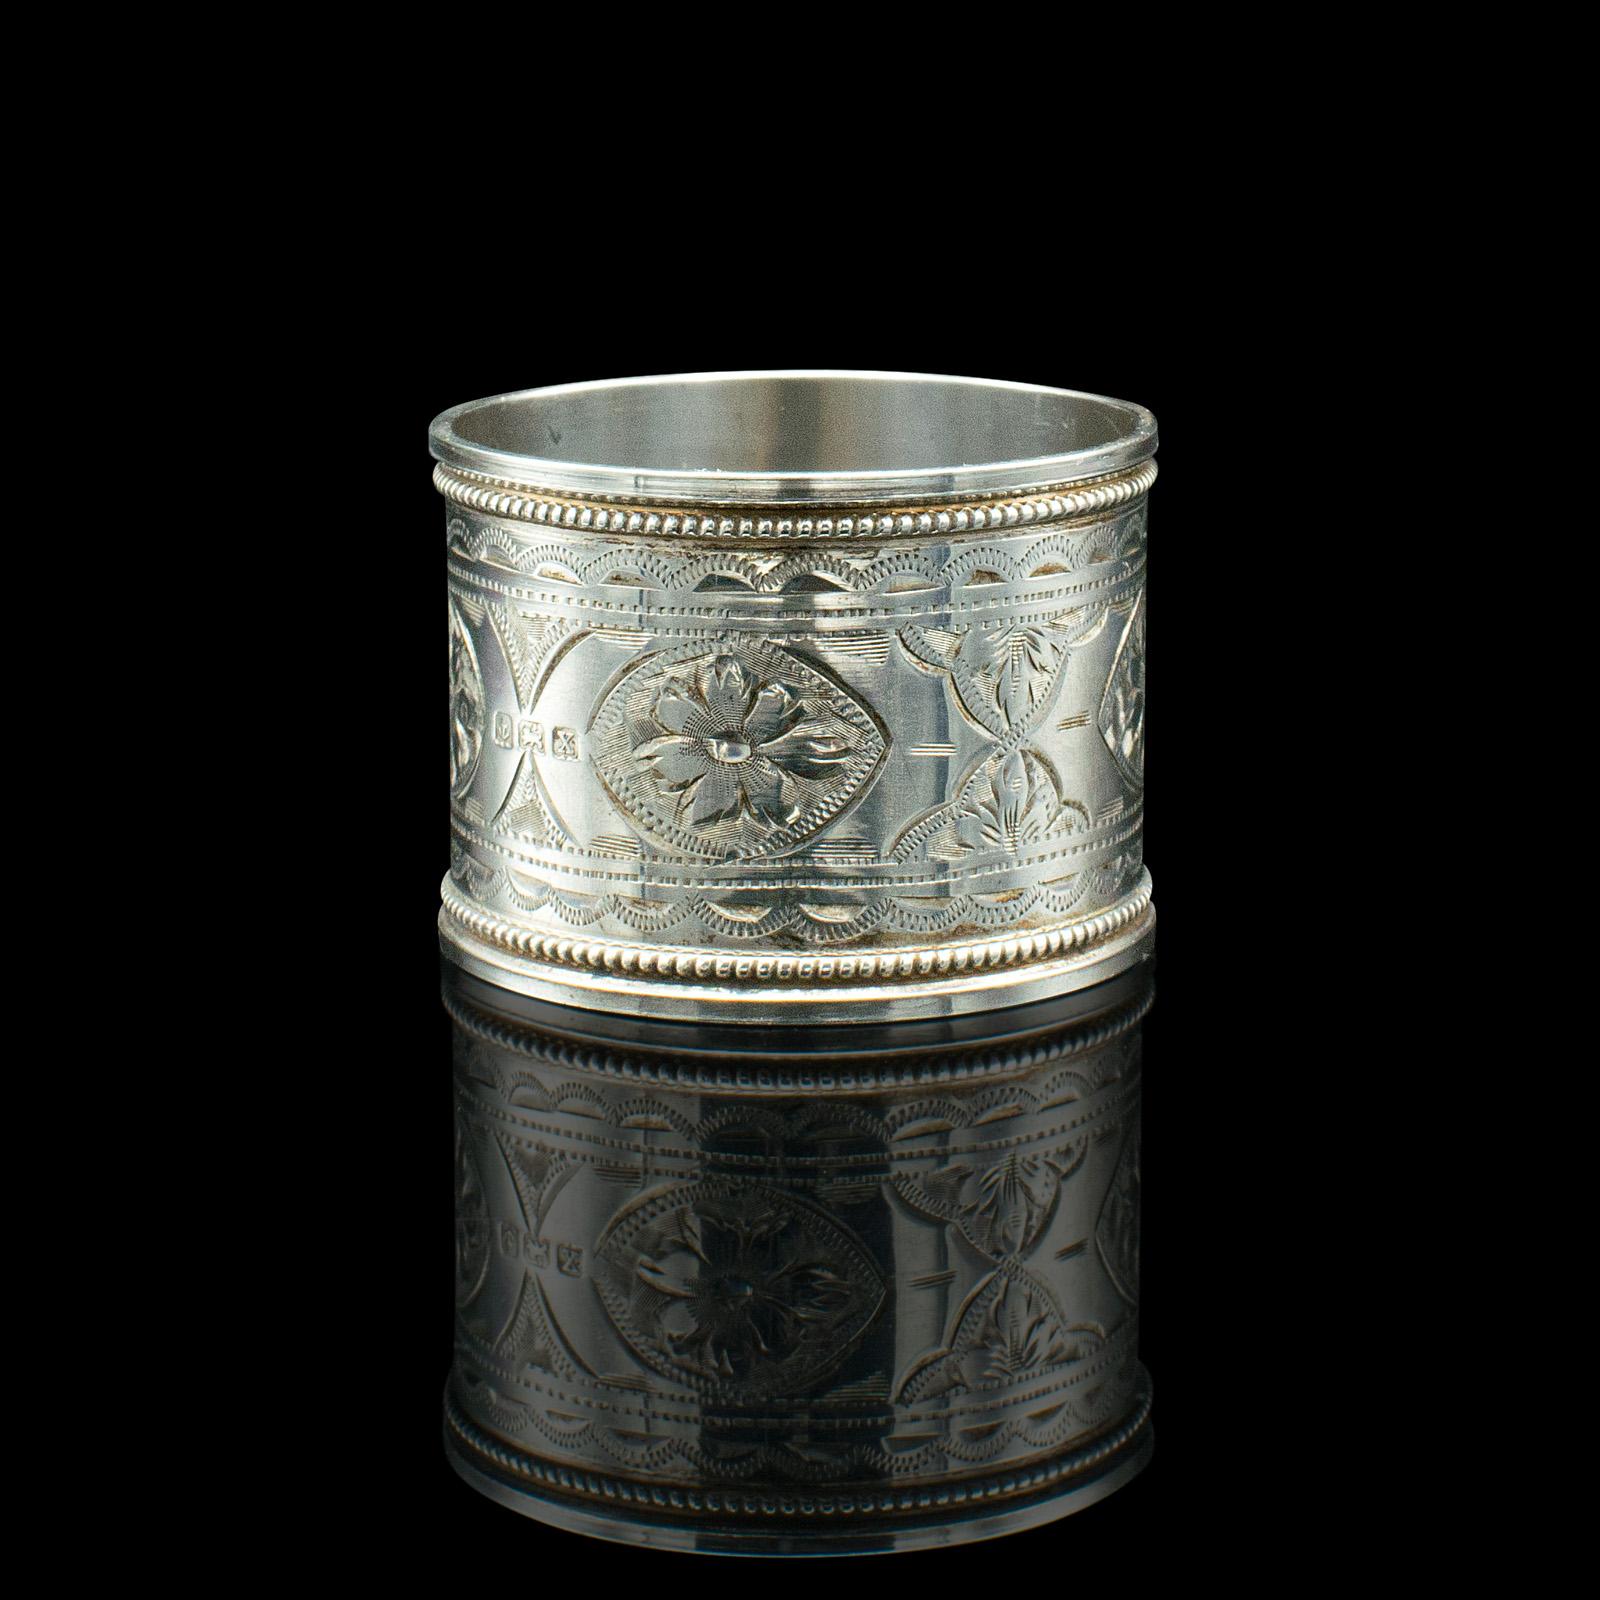 British Antique Napkin Ring, English Sterling Silver, Table Decor, Hallmarked, Date 1922 For Sale